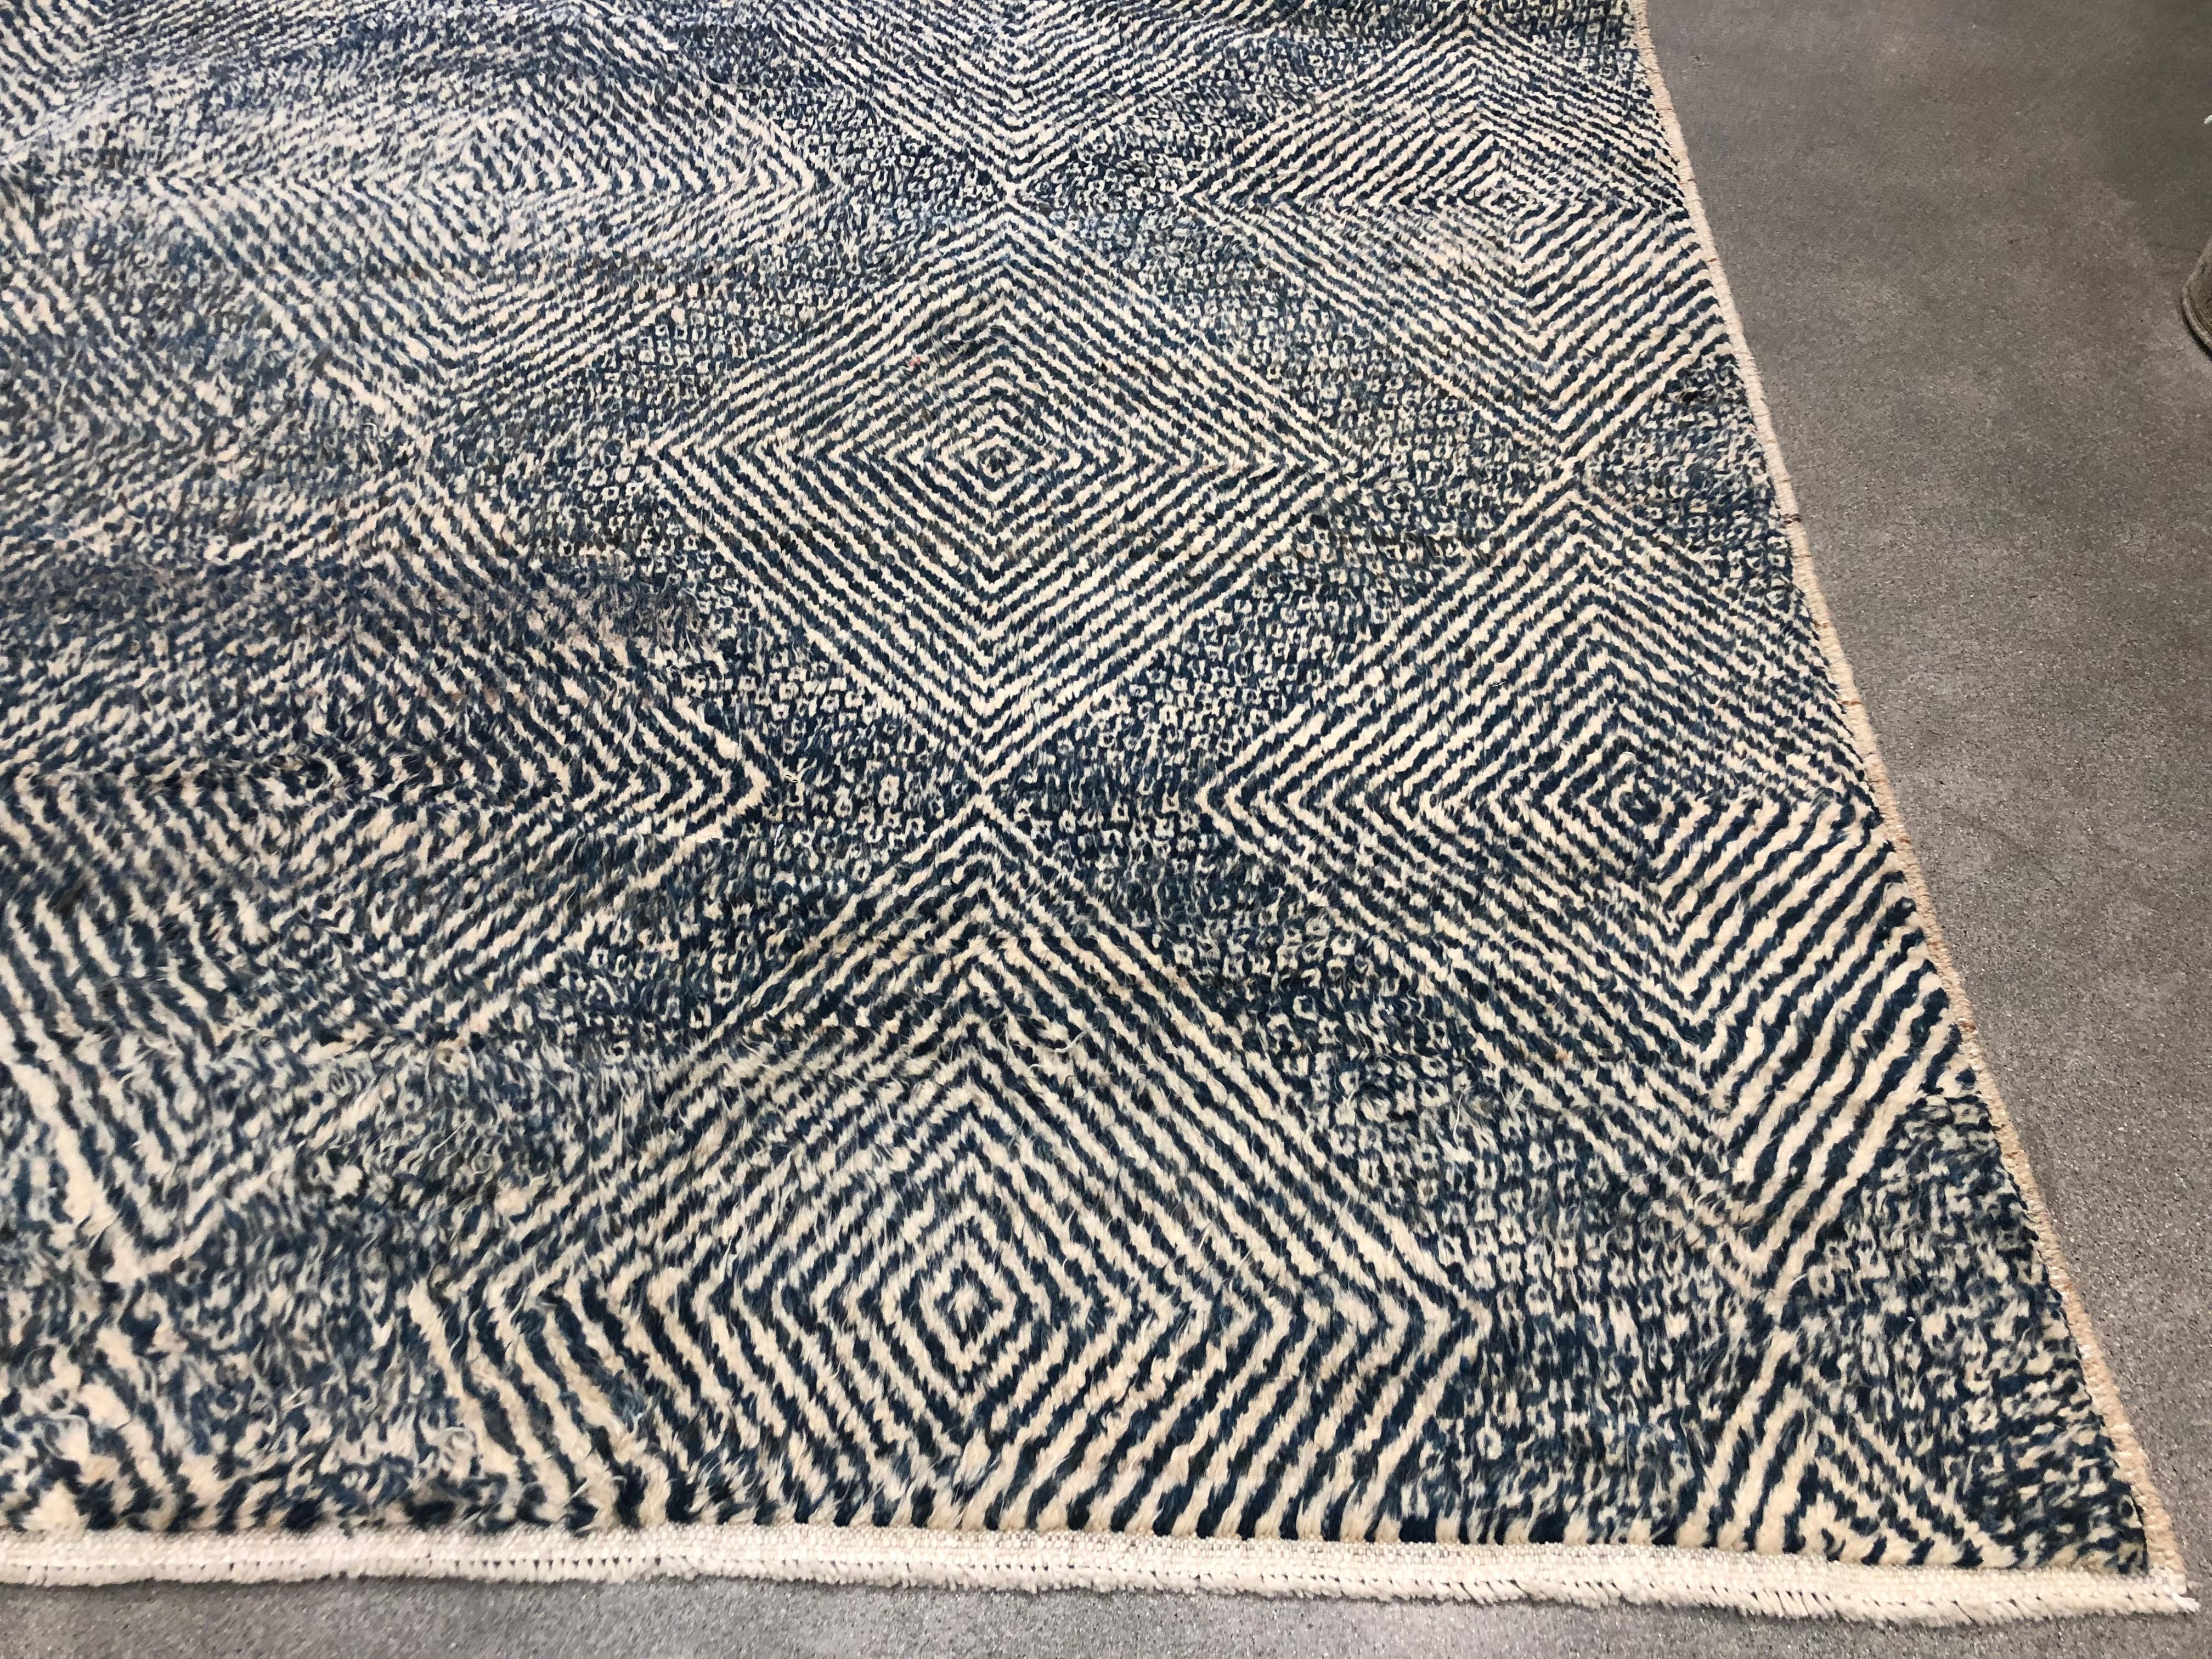 This blue and cream colored diamond design rug is handmade and hand knotted made in Pakistani. This rug has a slight plushiness that is similar to a Moroccan rug. 

